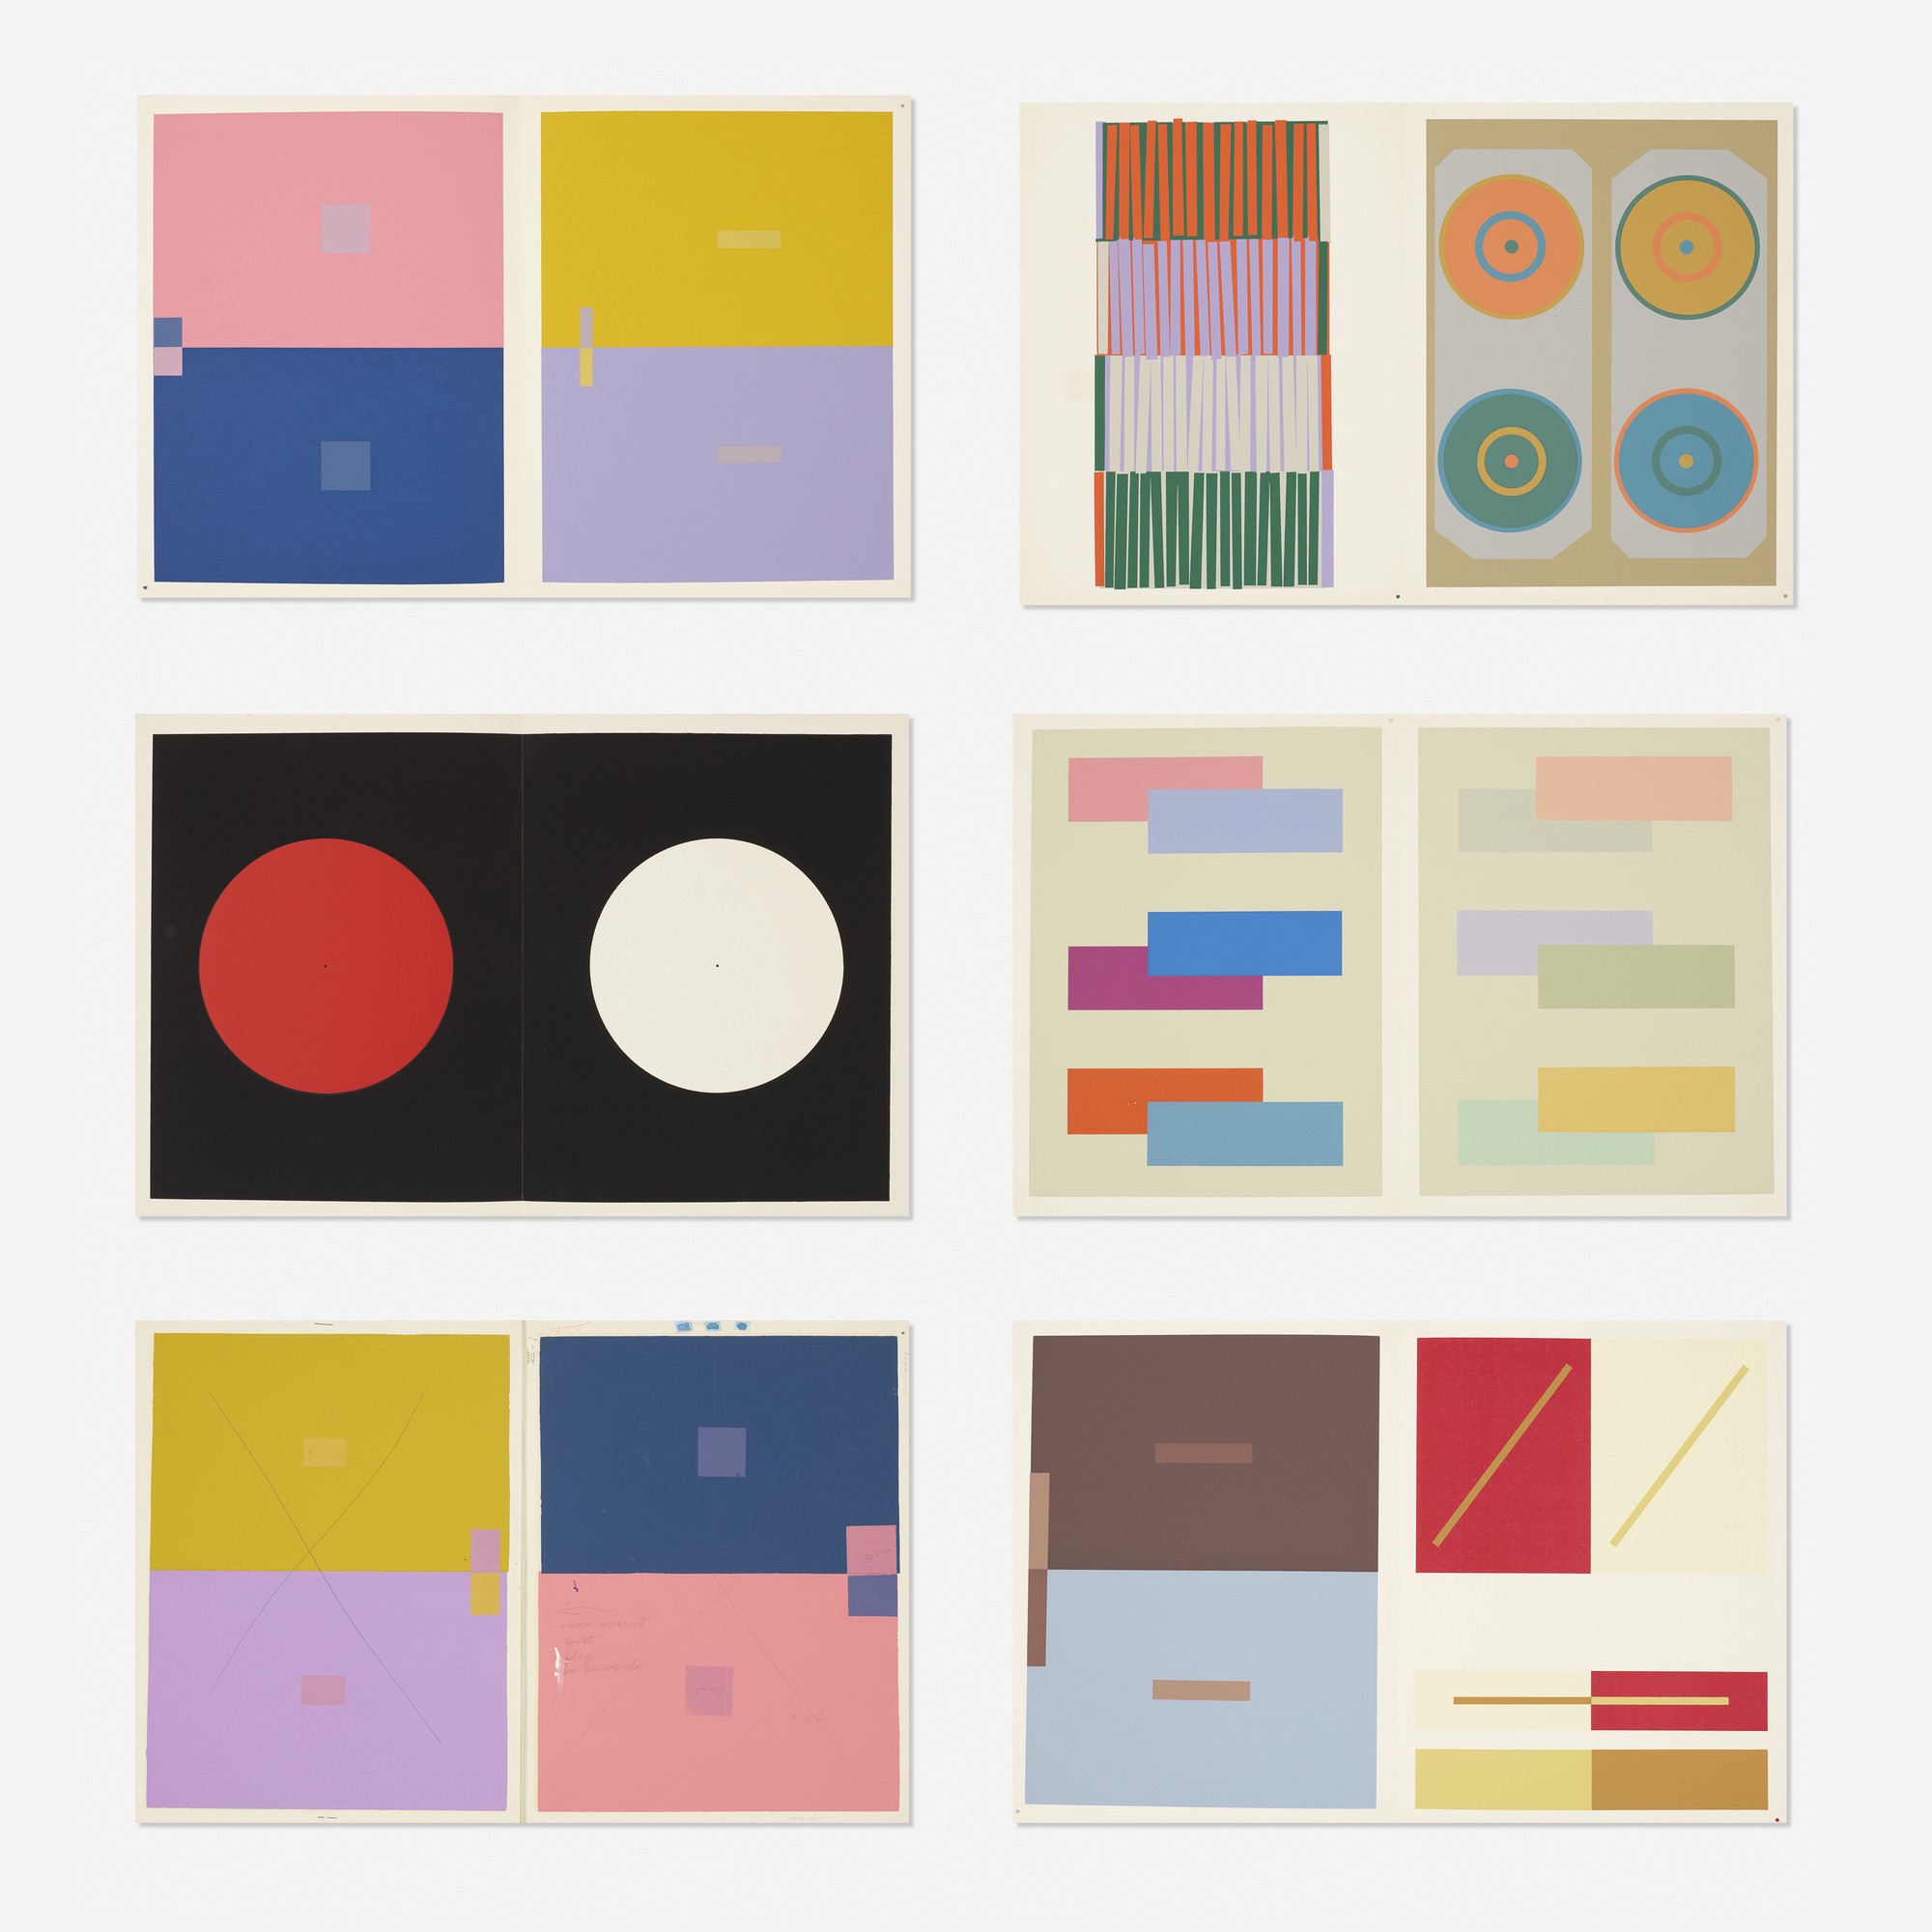 Pages from Albers’ numerous color studies